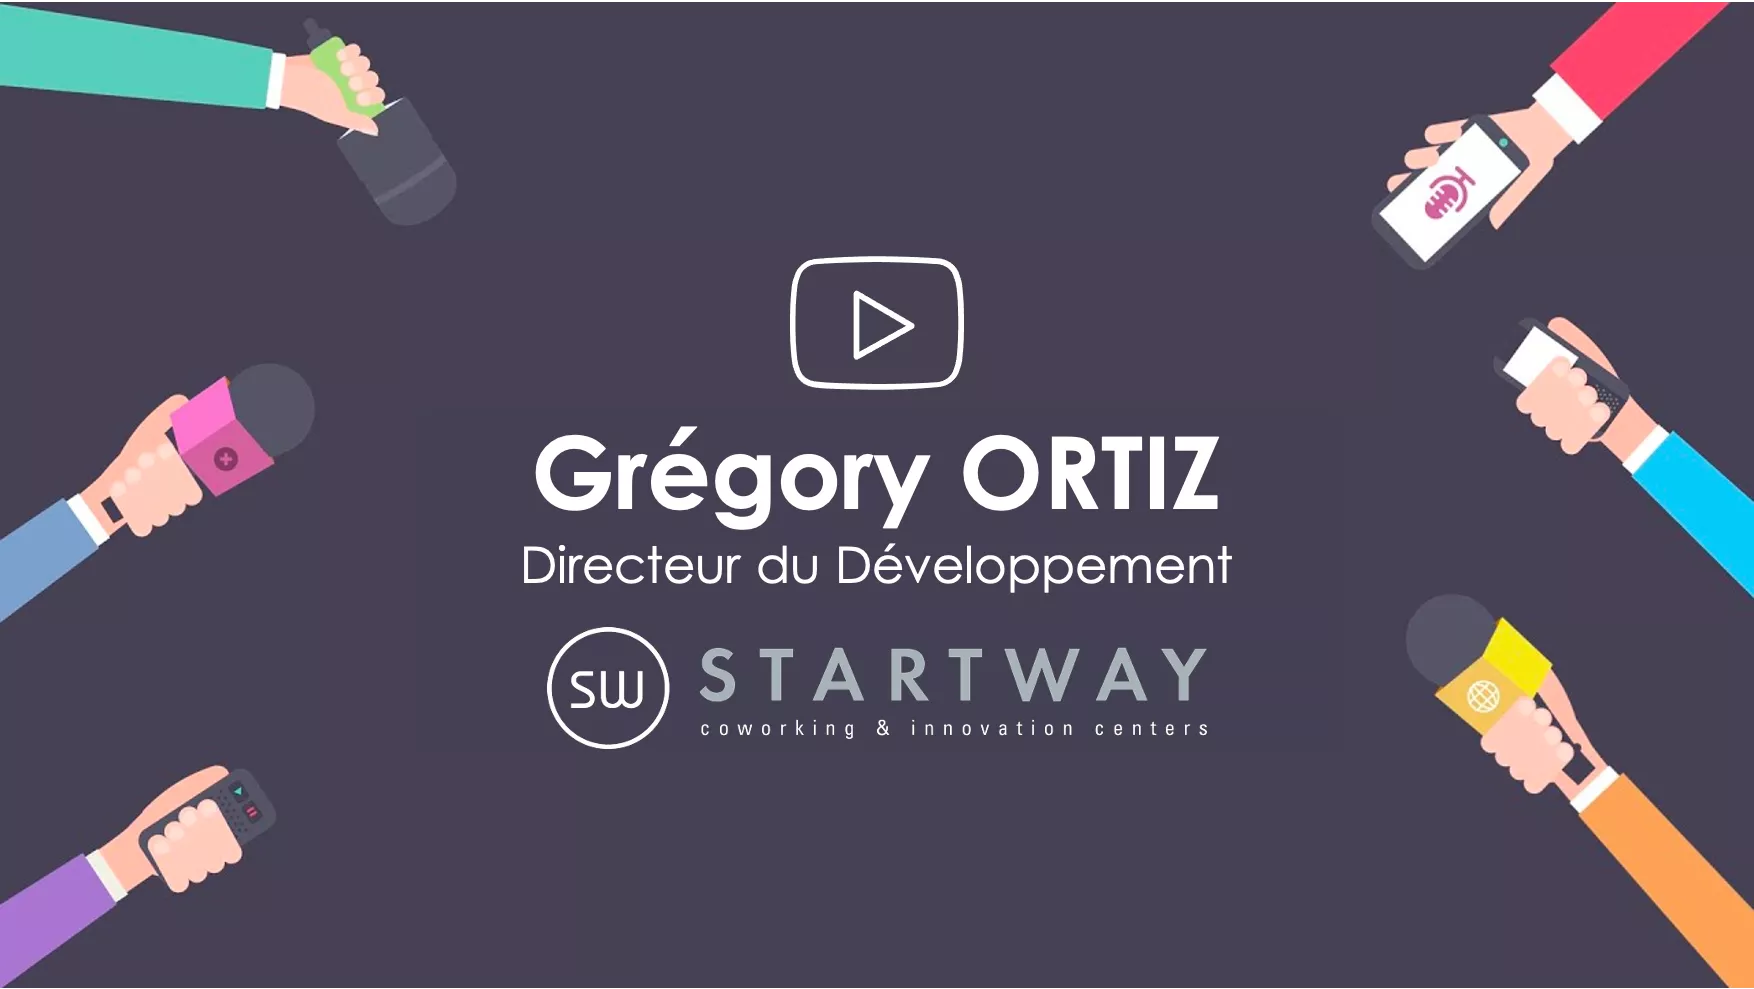 Couverture interview Gregory Ortiz